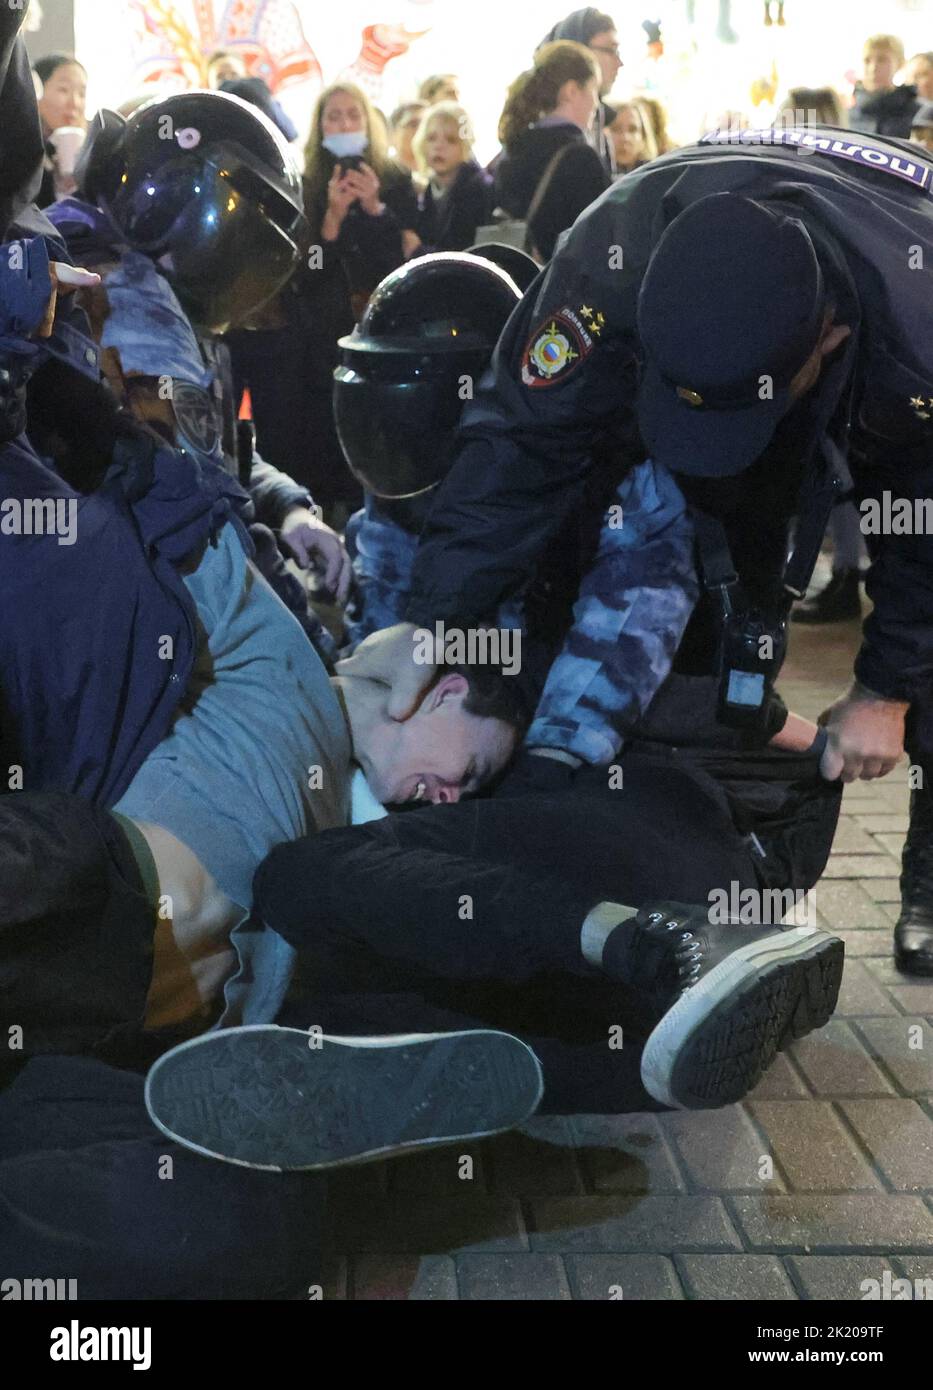 Russian police officers detain men during an unsanctioned rally, after opposition activists called for street protests against the mobilisation of reservists ordered by President Vladimir Putin, in Moscow, Russia September 21, 2022. REUTERS/REUTERS PHOTOGRAPHER Stock Photo